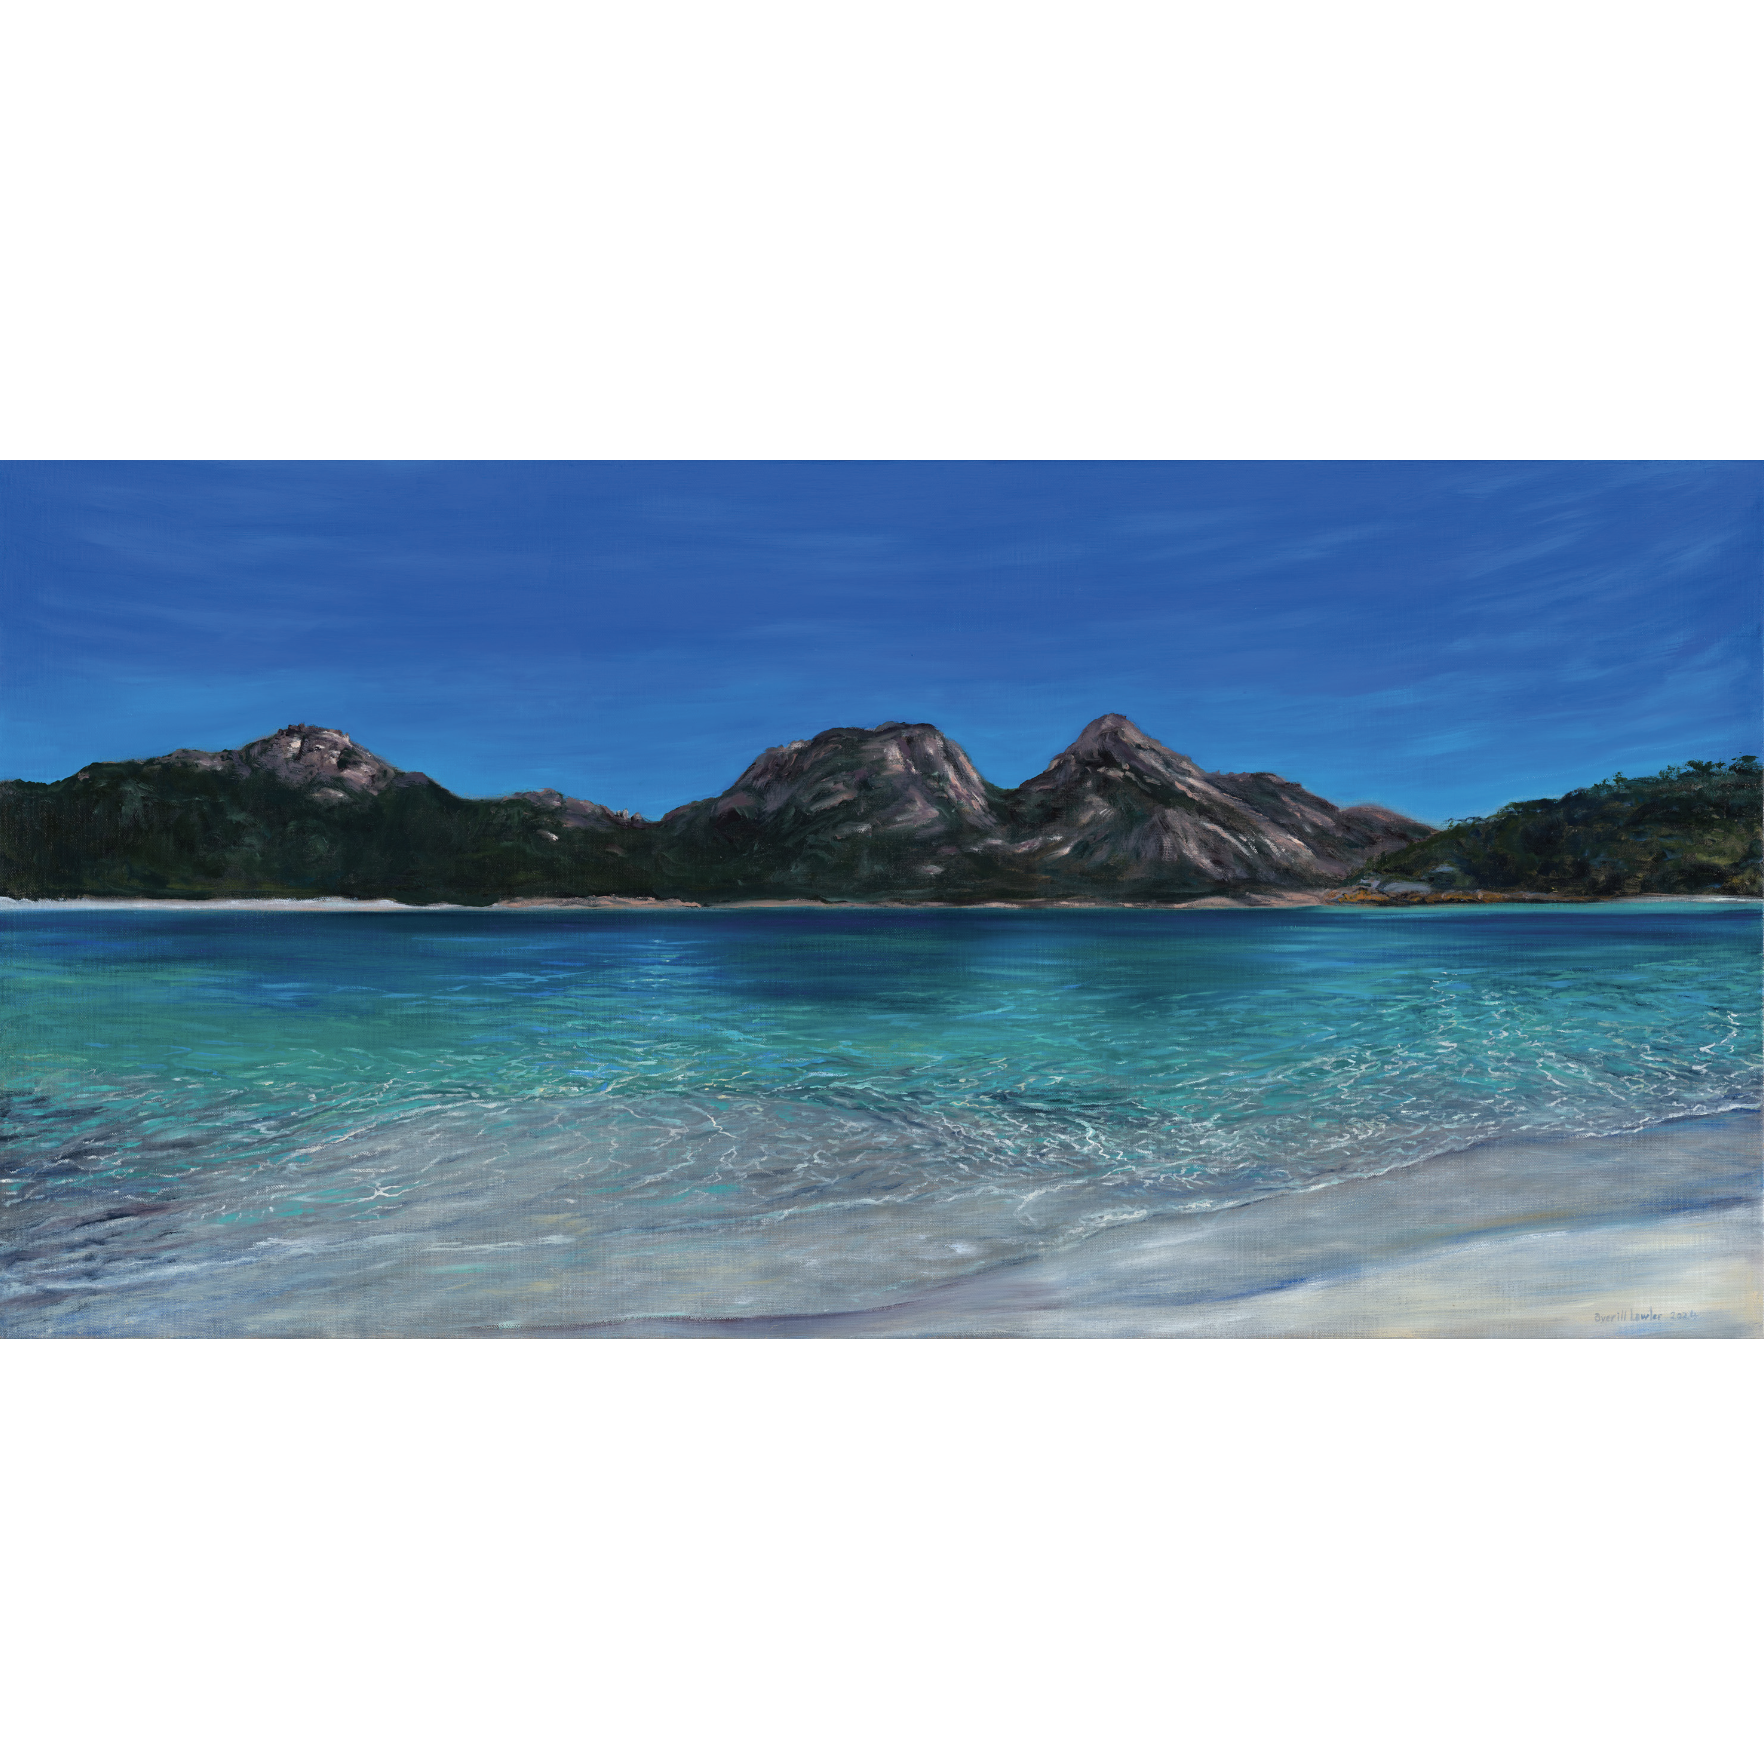 Averill Lawler - Turquoise and Granite 1, Wineglass Bay